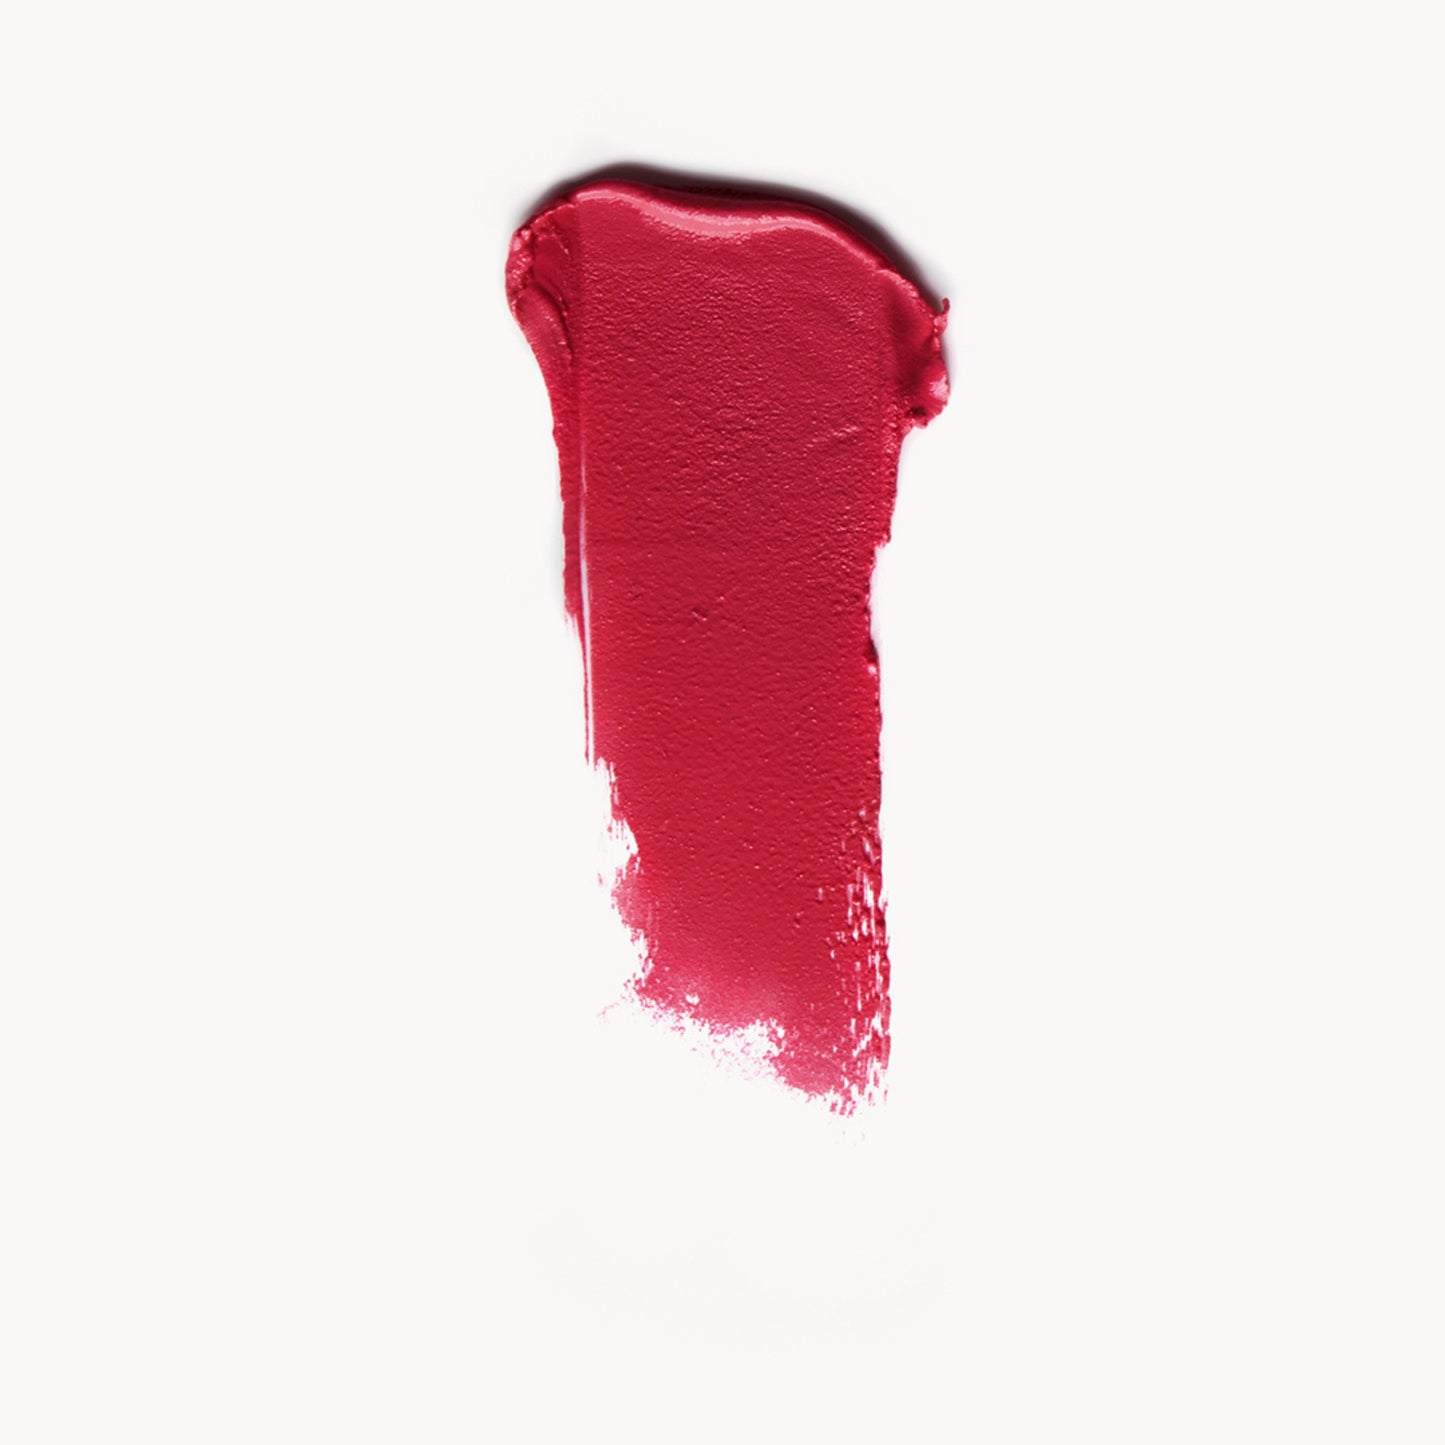 A wipe of deep berry cream blush on a white background